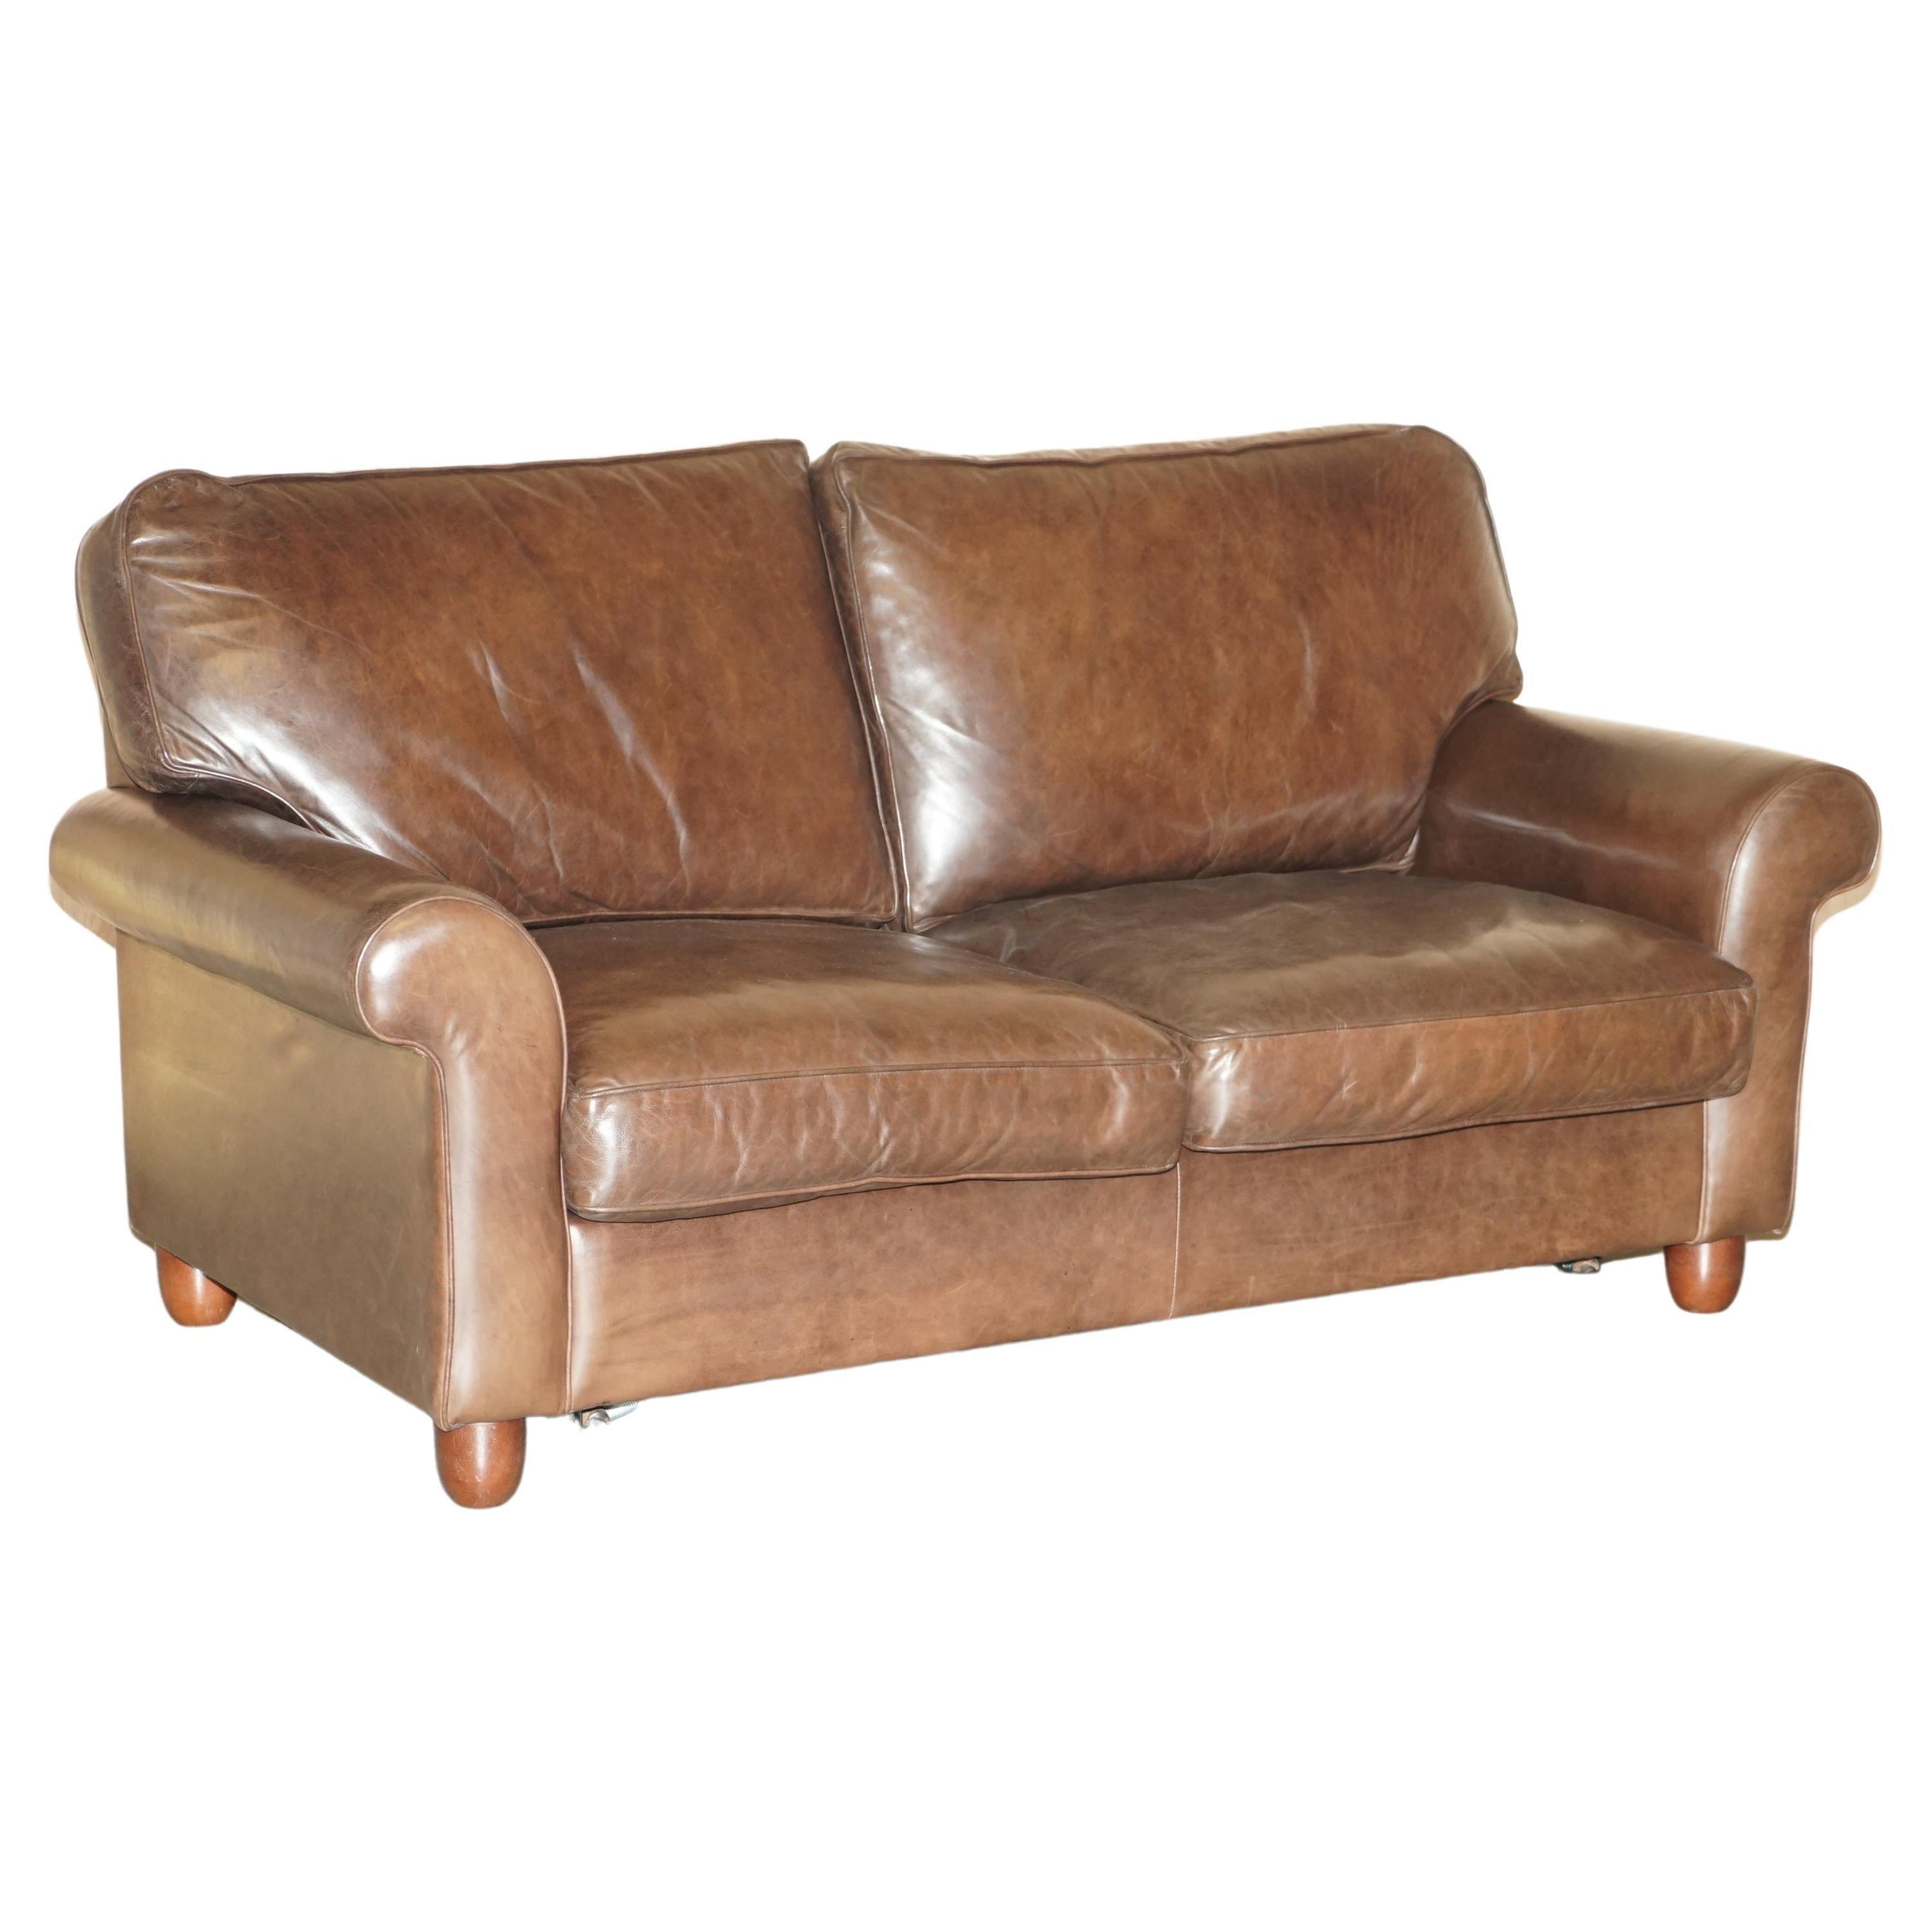 Lovely Heritage Brown Leather Laura Ashley Mortimer Sofabed in Very Nice Order For Sale